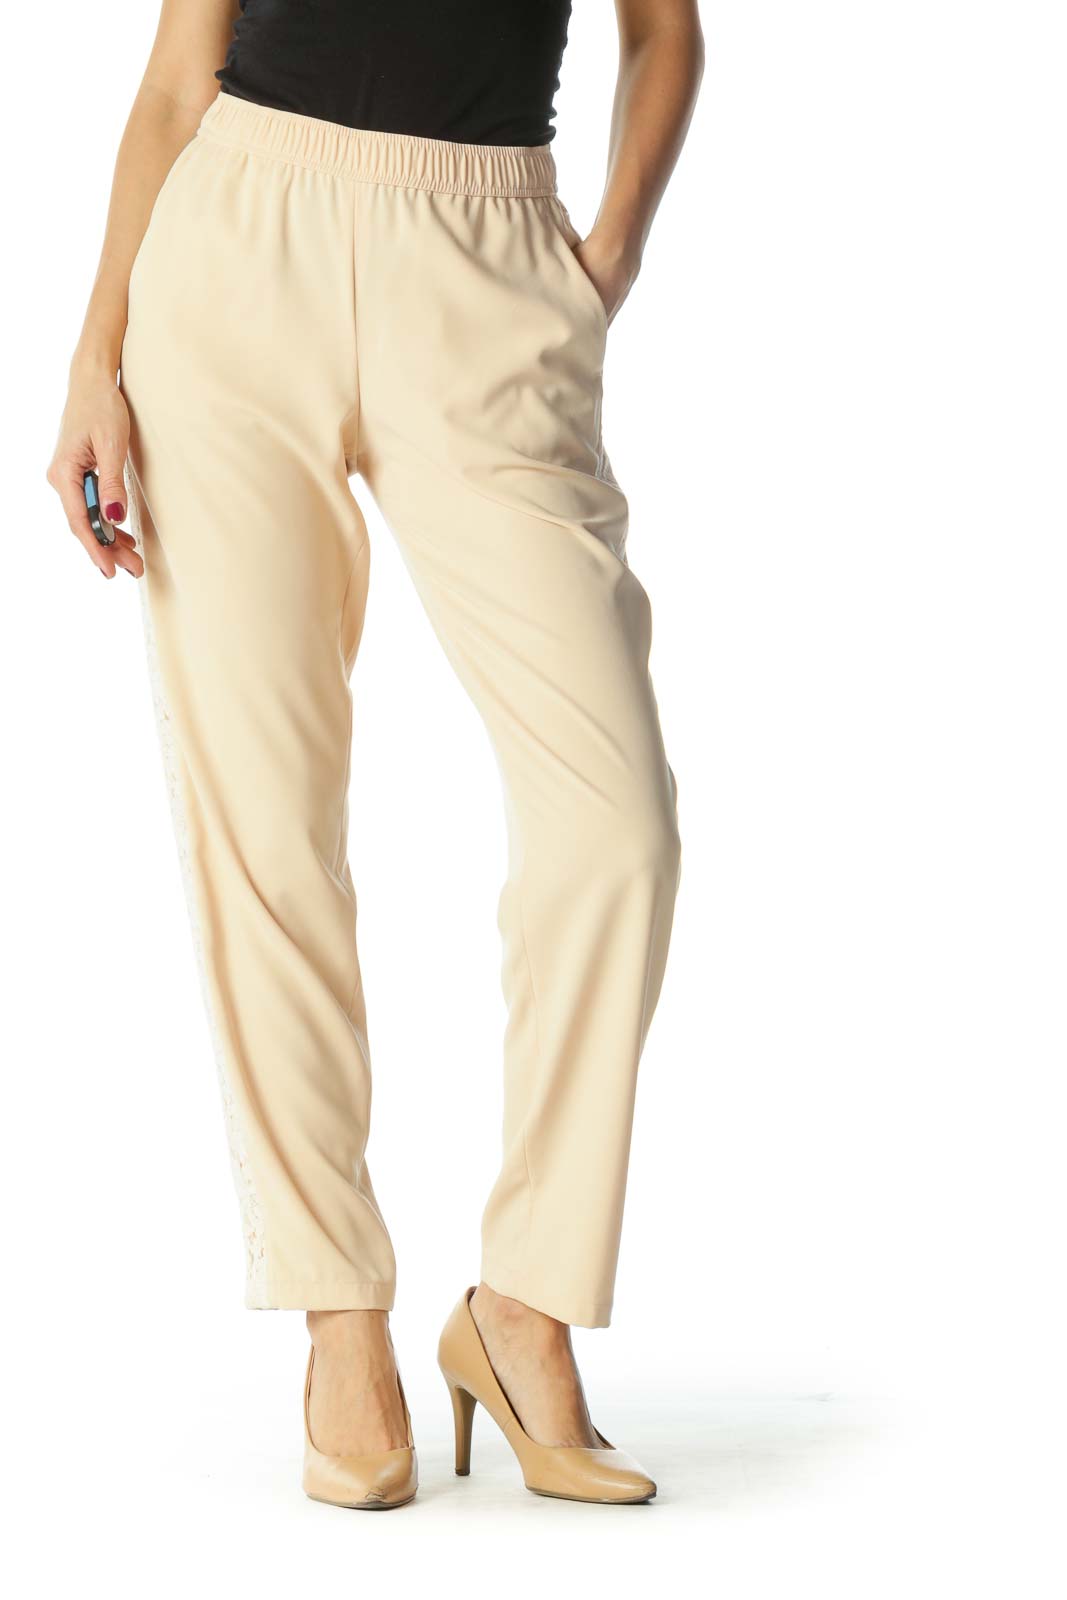 Cream Lace Tapered Pants Front